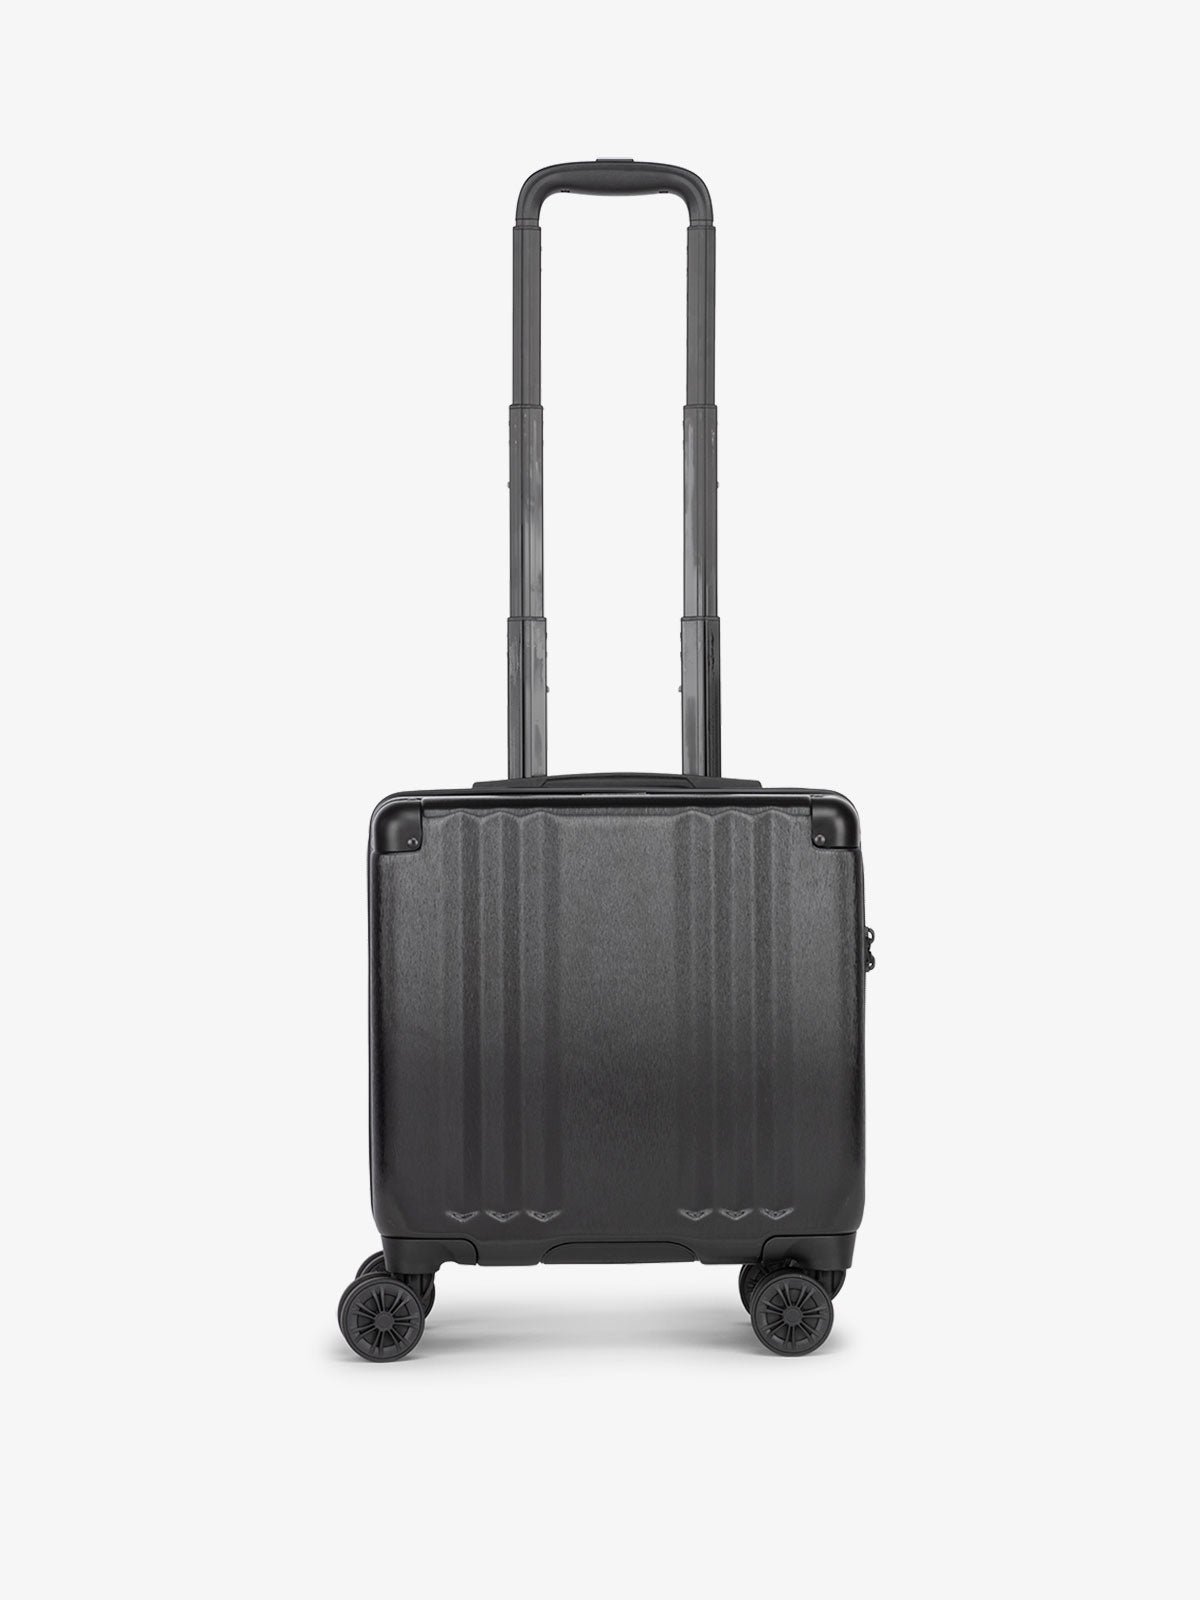 CALPAK Ambuer small carry on luggage with 360 spinner wheels in black